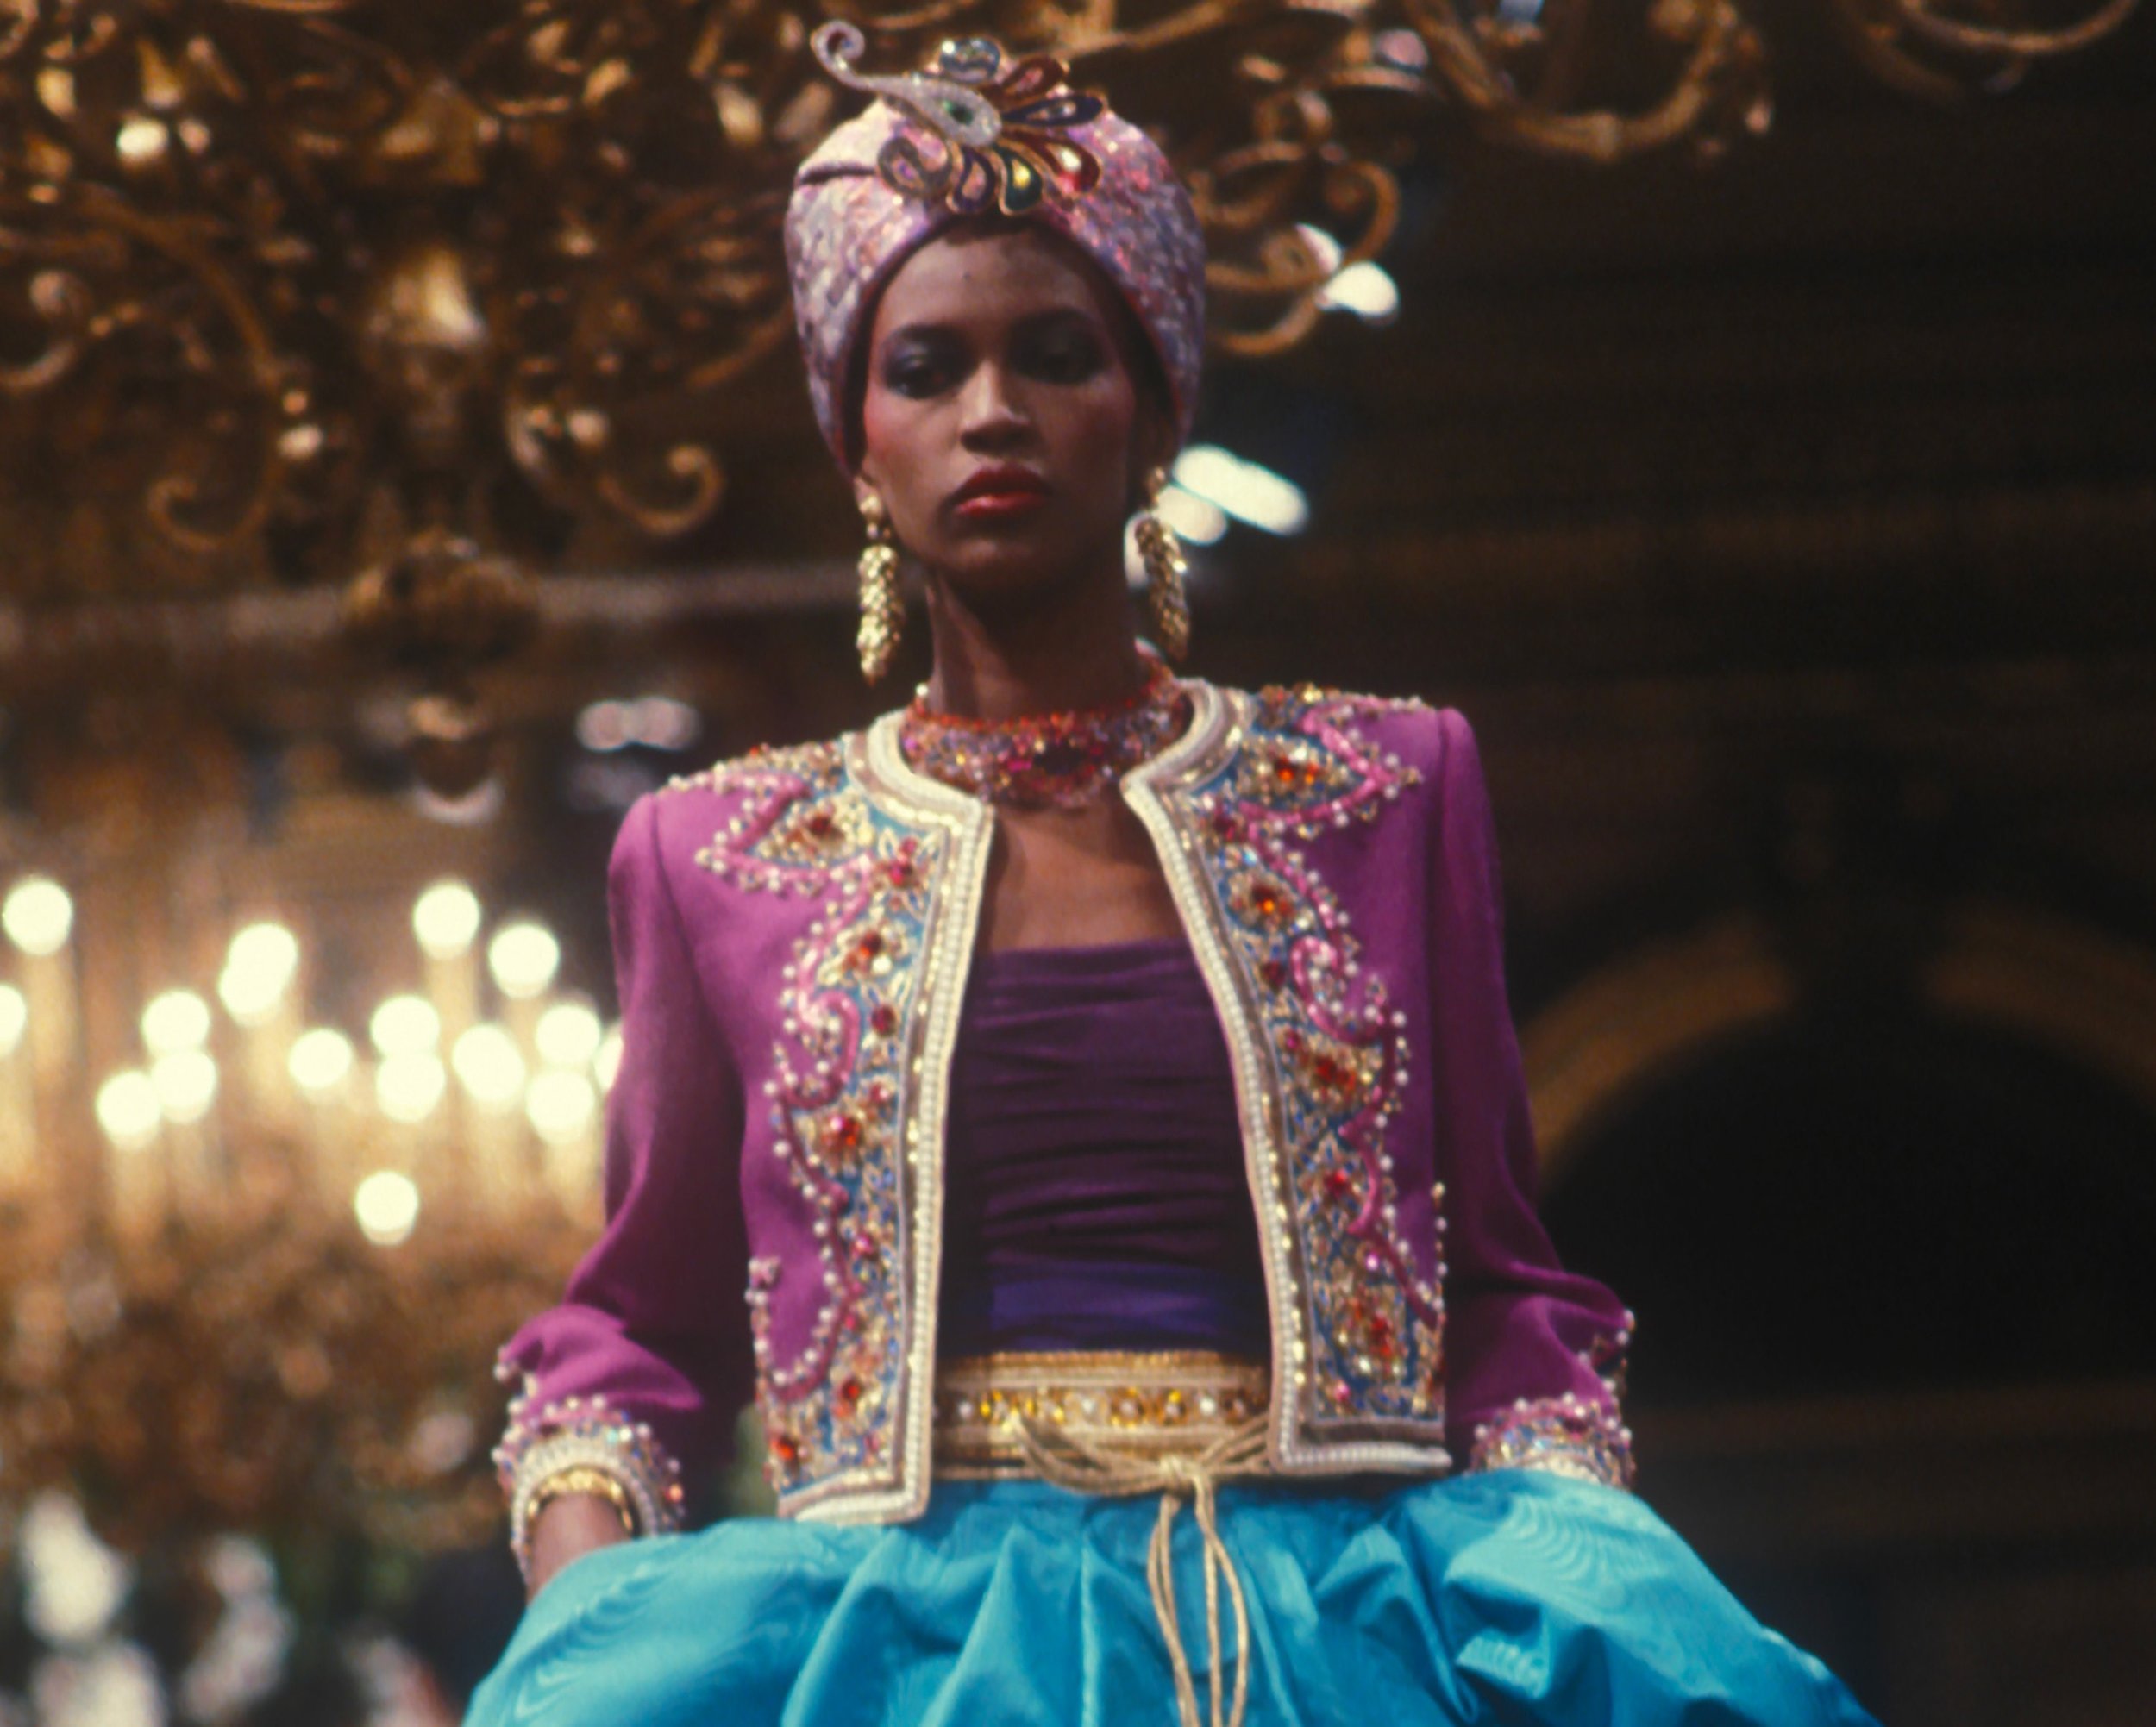 Yves Saint Laurent and 'Dreams of the Orient' - The New York Times